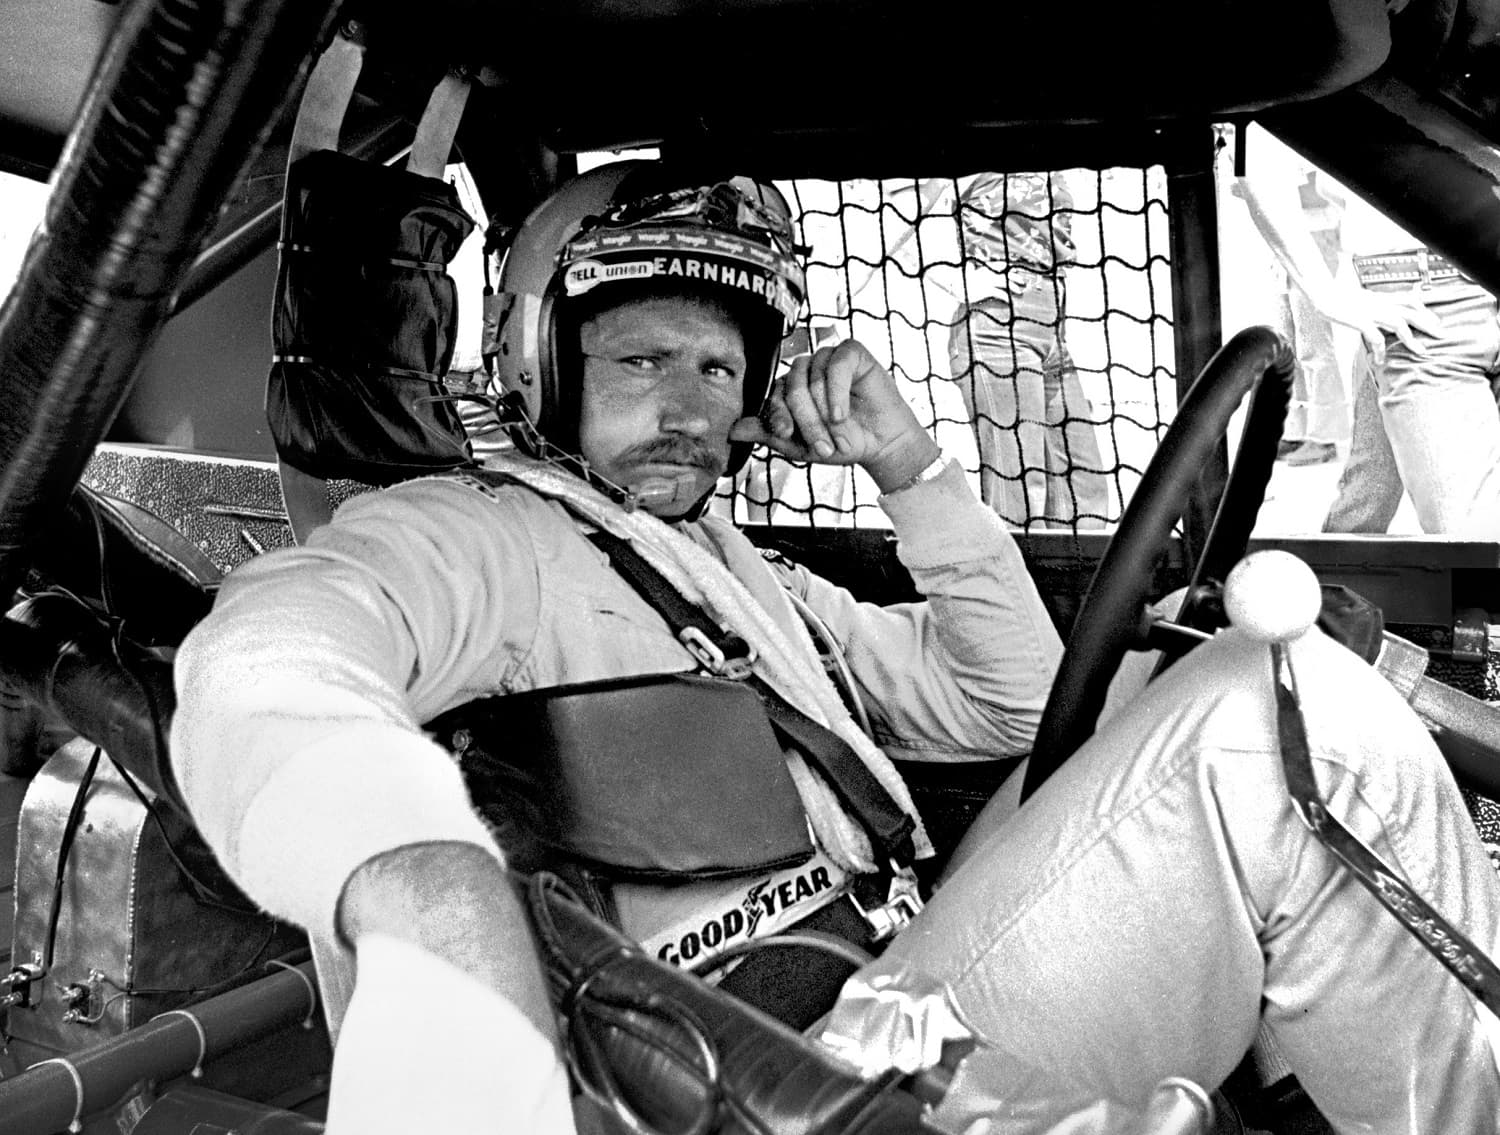 Dale Earnhardt sits in his Pontiac Grand Prix while it is repaired after an accident during the 1981 Firecracker 400 at the Daytona International Speedway on July 4, 1981. | Robert Alexander/Archive Photos/Getty Images